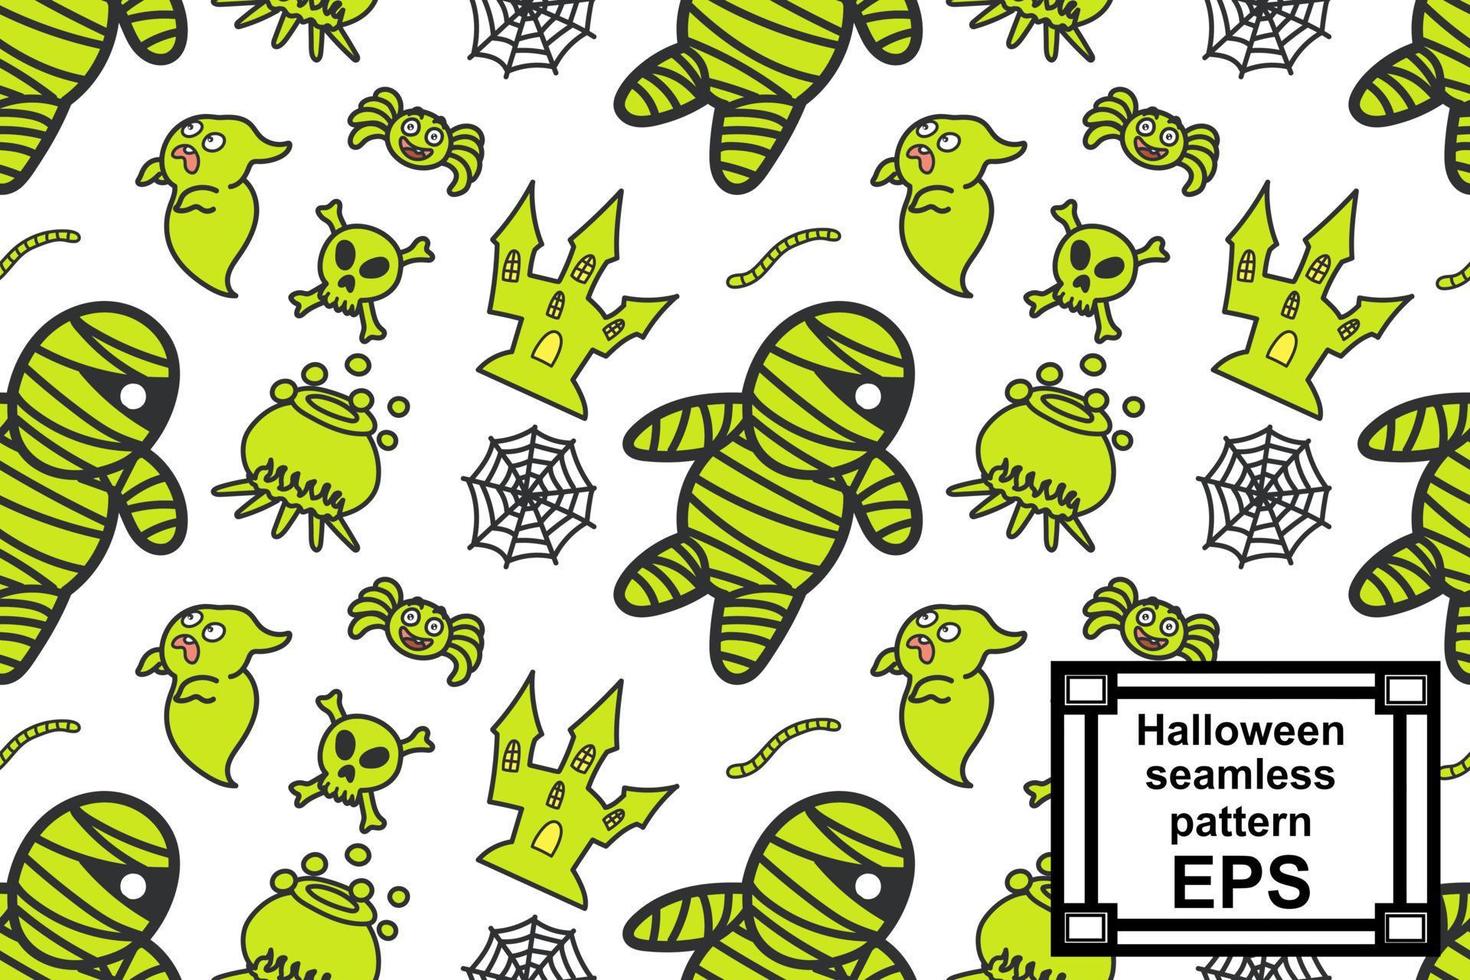 Mummy and ghost, cute monsters to celebrate Halloween wallpaper, wrapping, print, art, etc vector